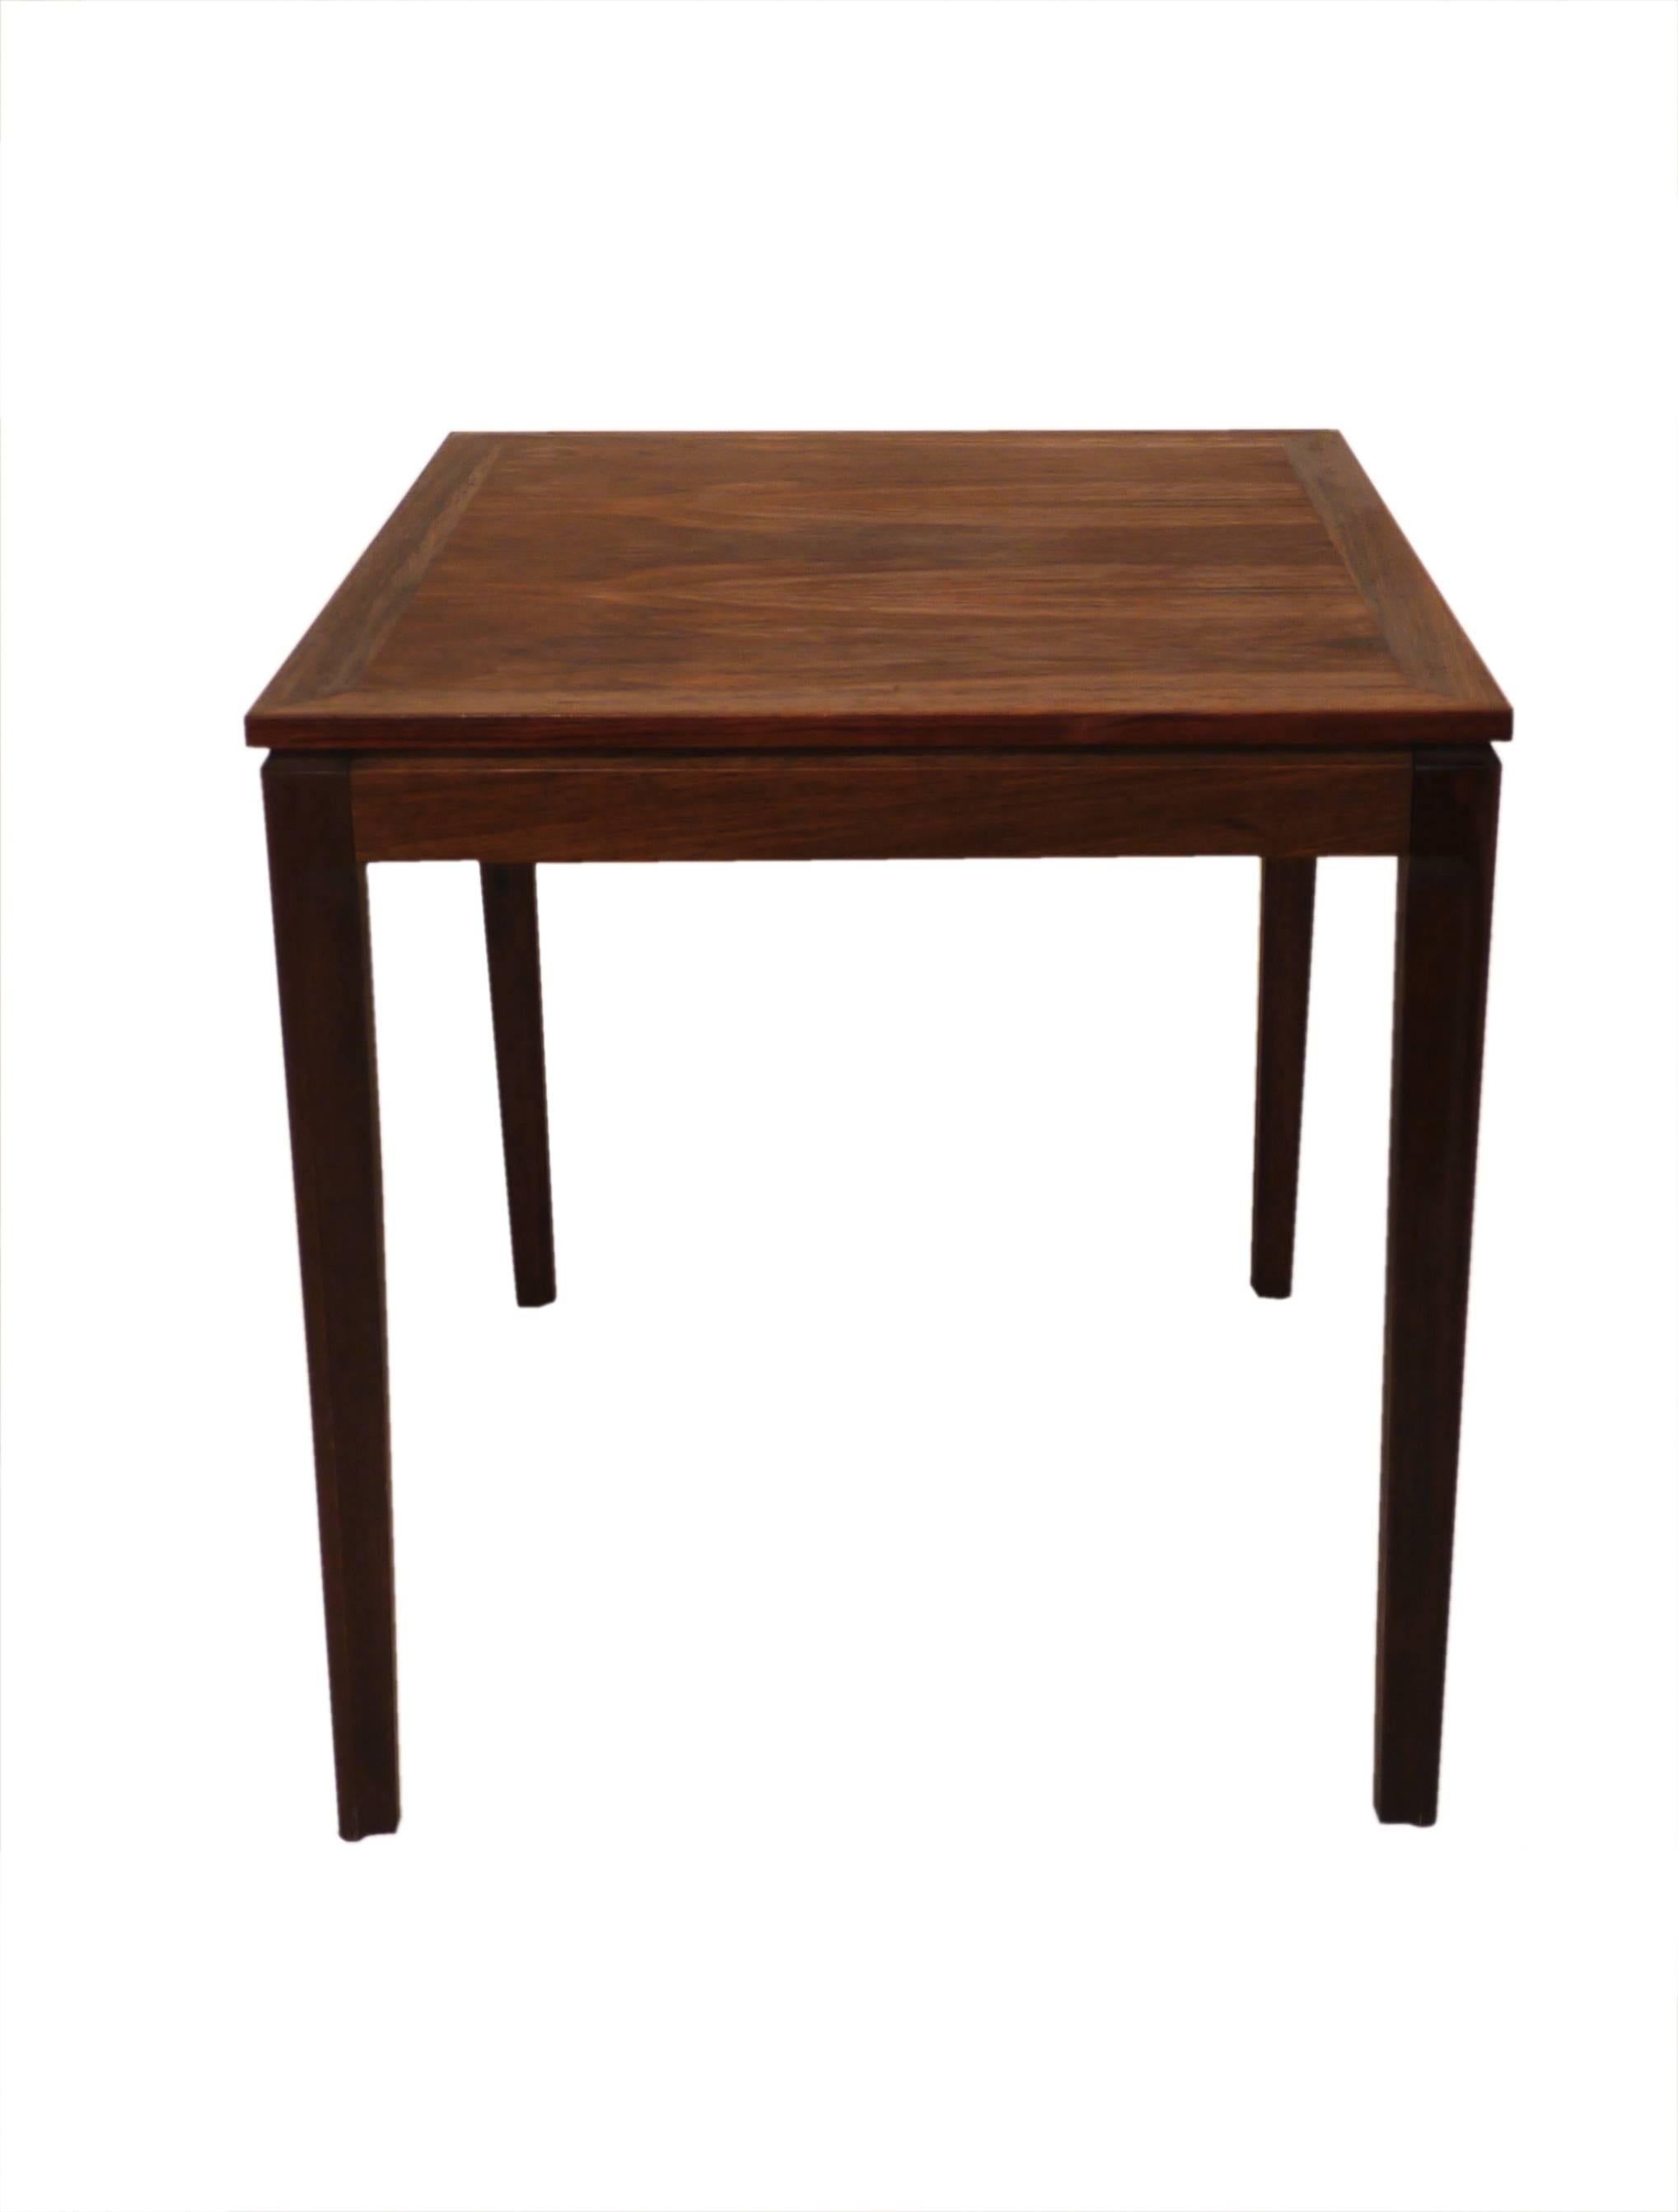 Scandinavian Modern Danish Mid-Century Rosewood Side Table from 1960s For Sale